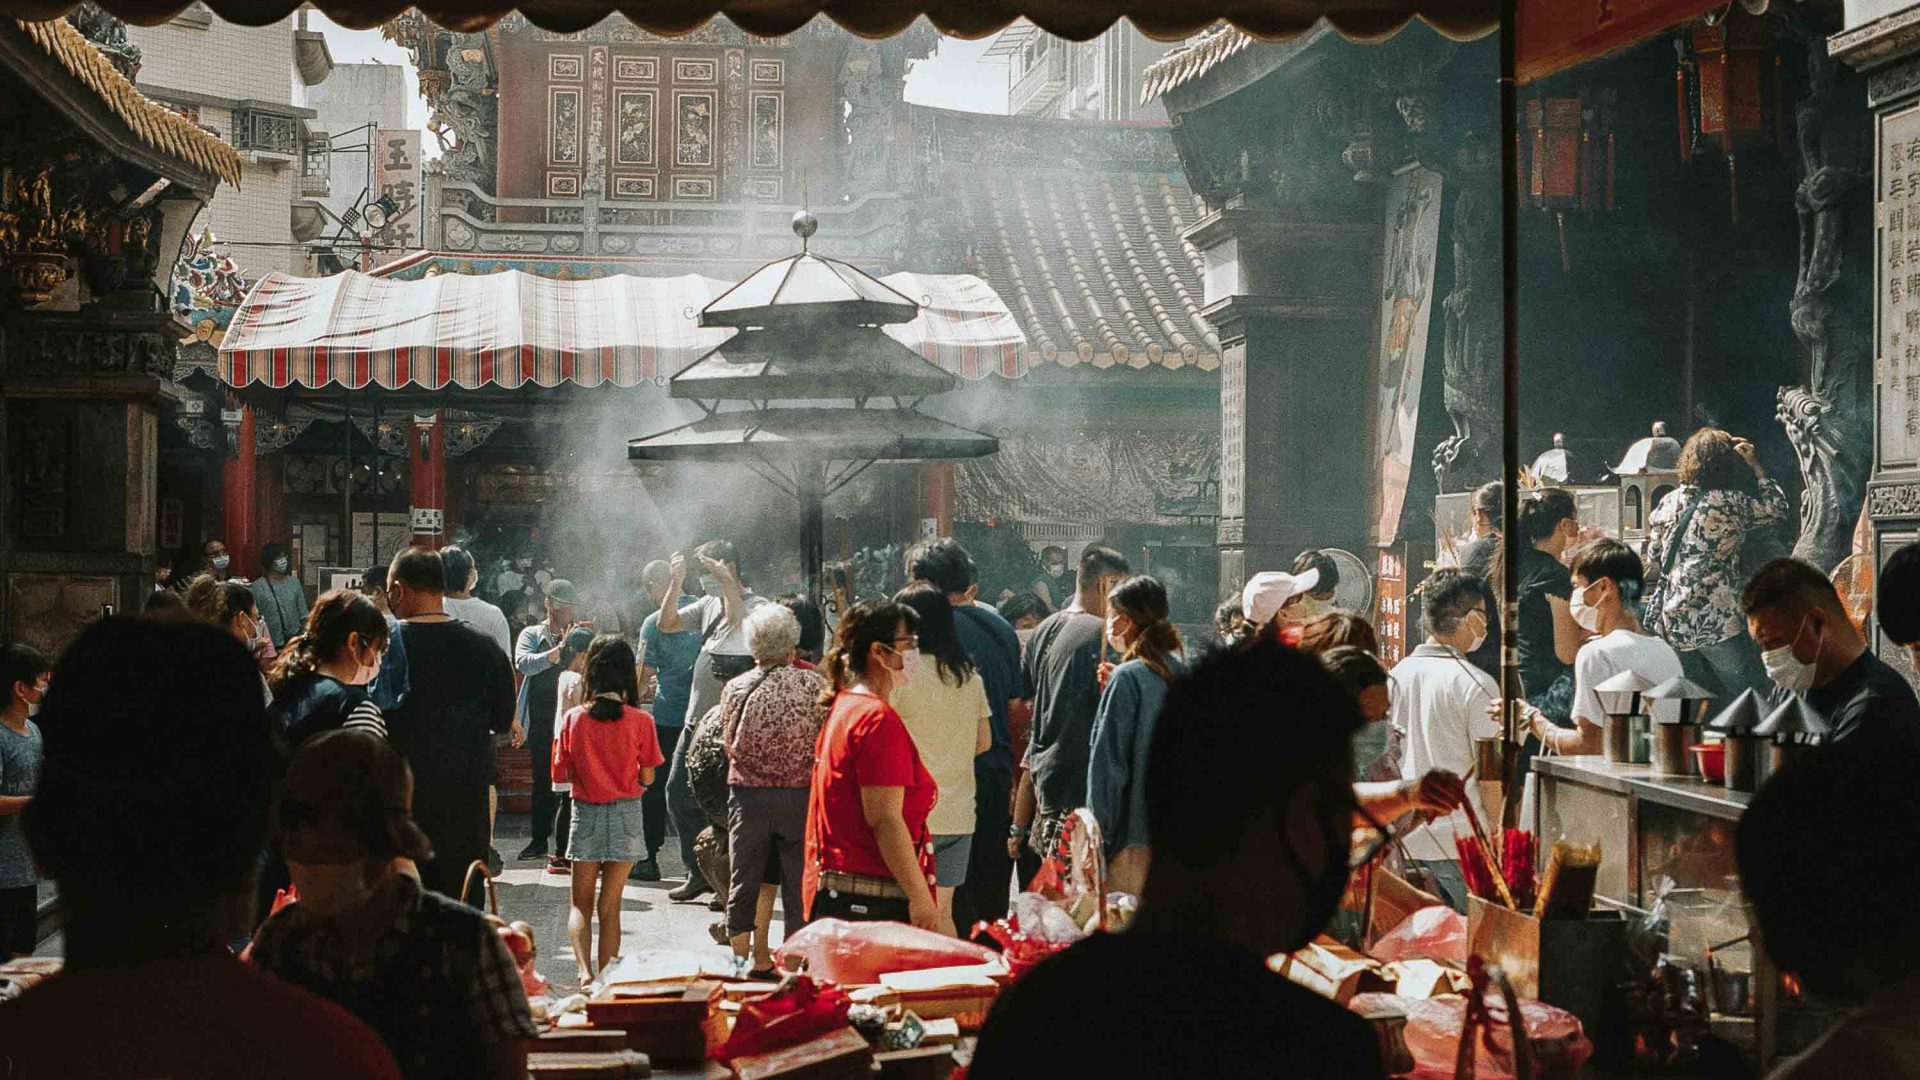 Incense burns and people gather in a smoky temple.